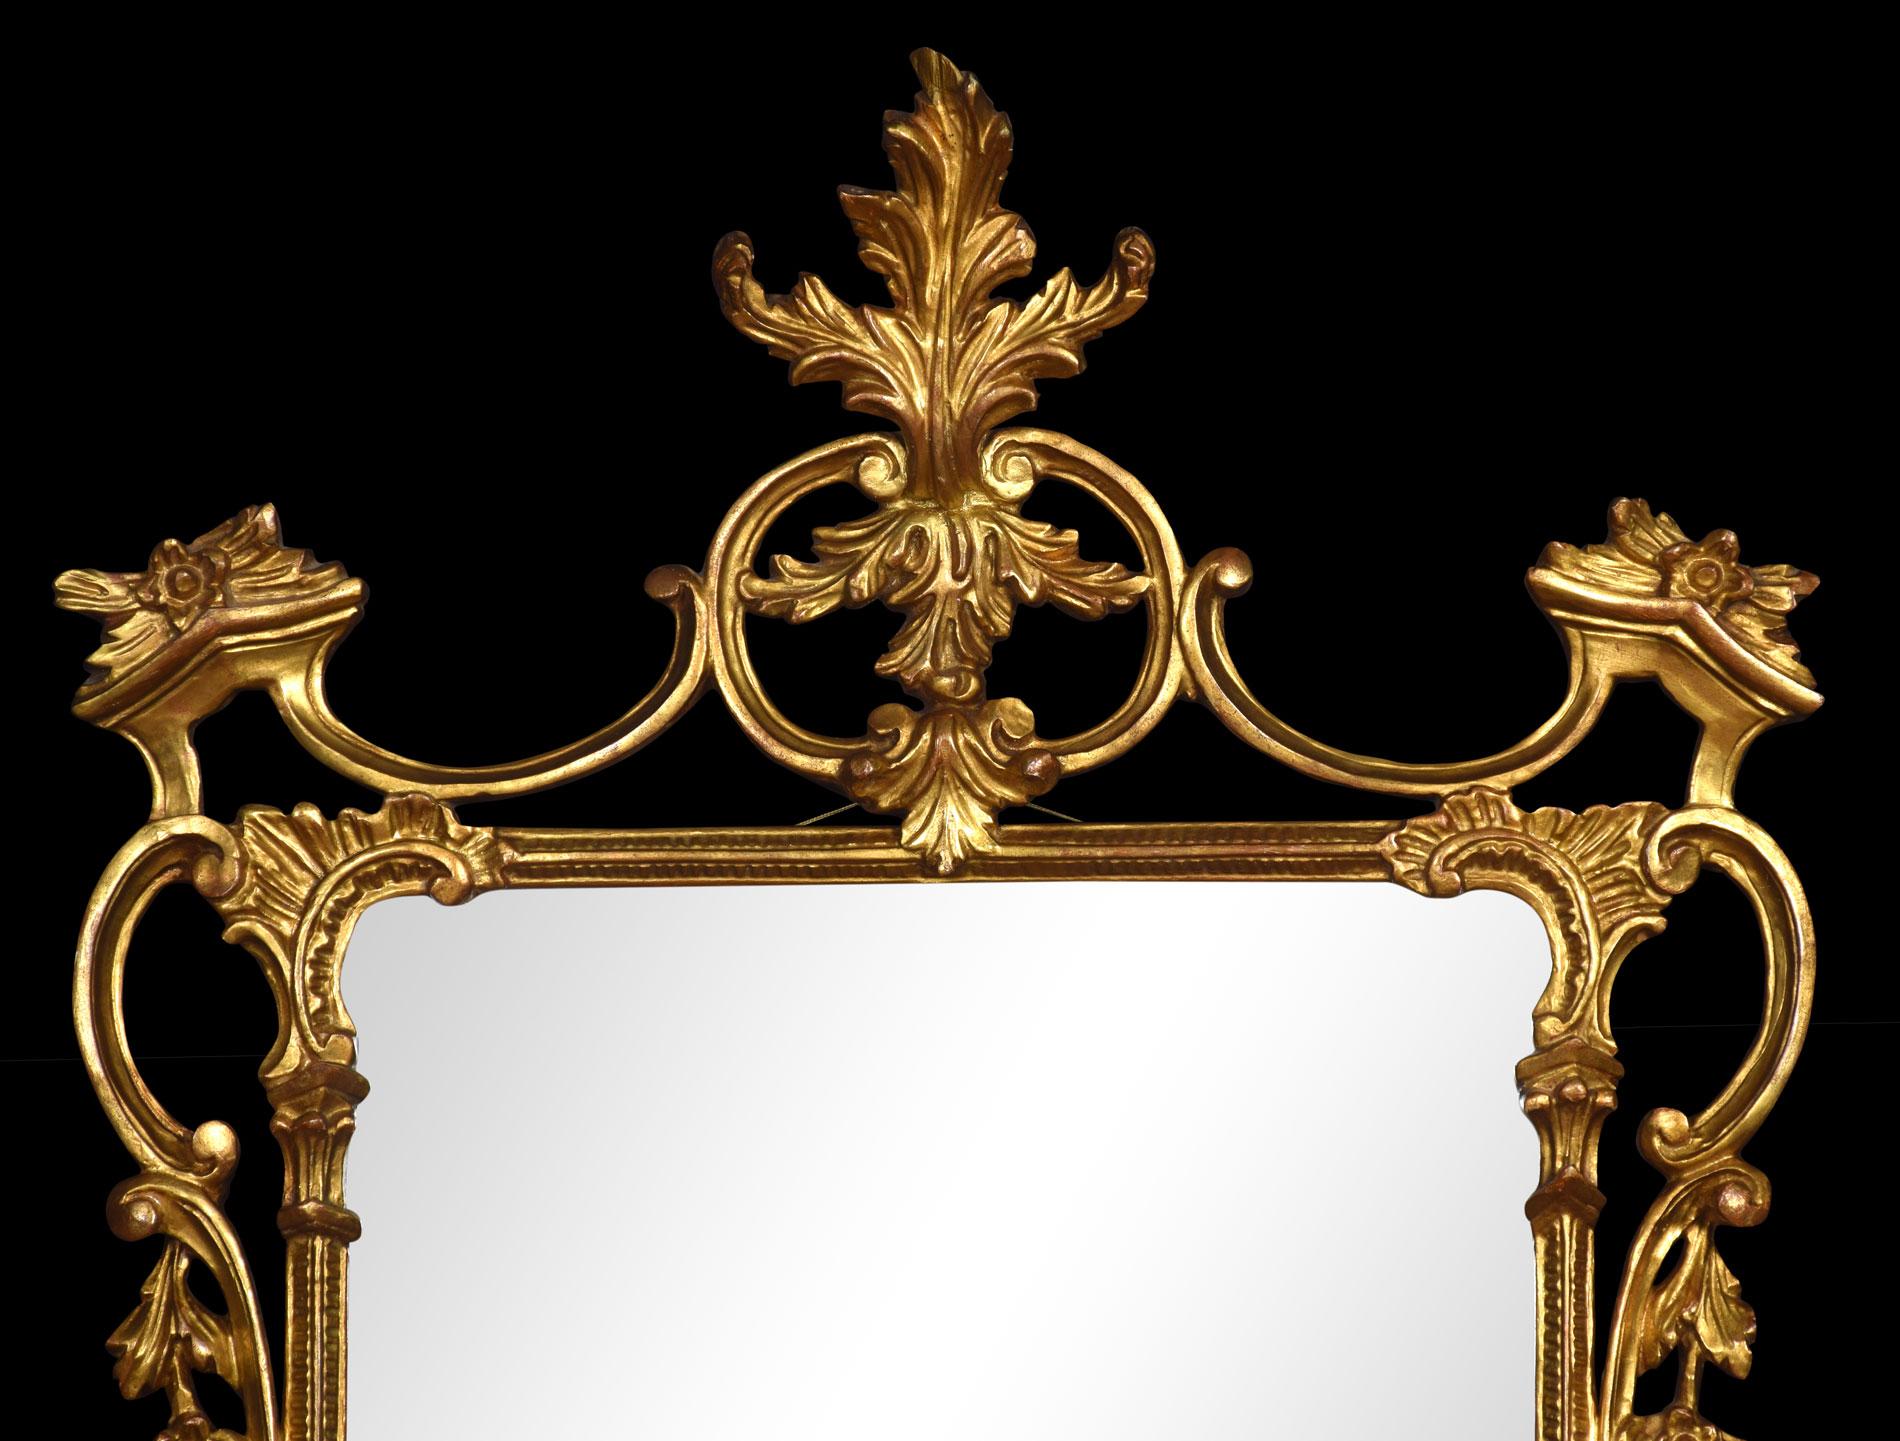 George III style Rococo Revival giltwood mirror. The original cartouche-shaped bevelled plate mirror within a conforming frame elaborately carved with rocaille and c-scrolls.
Dimensions
Height 50 Inches
Width 28.5 Inches
Depth 4.5 Inches